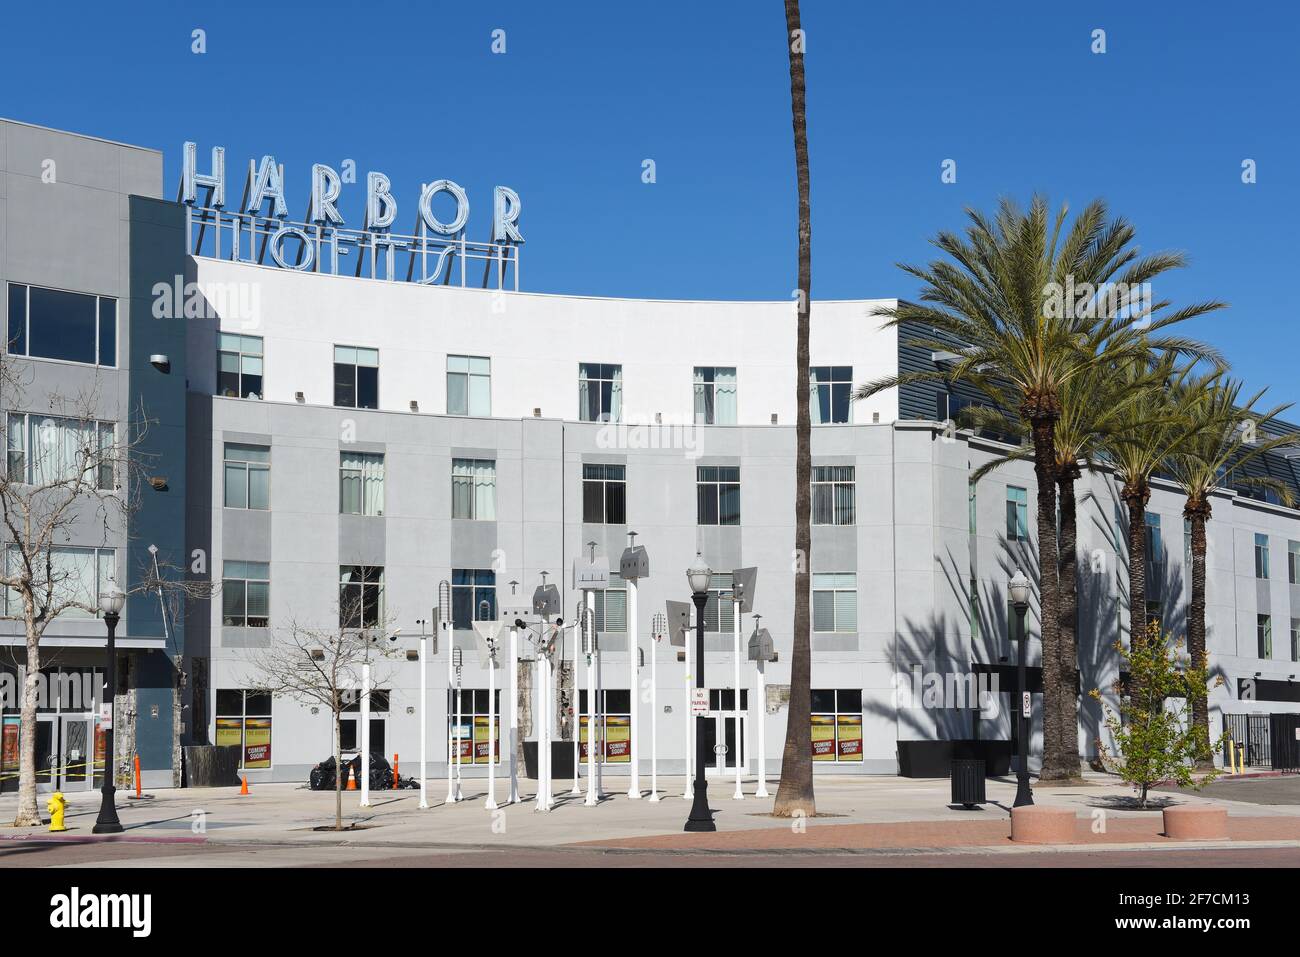 ANAHEIM, CALIFORNIA - 31 MAR 2021: Harbor Lofts sign atop the modern Condominium complex in the downtown Ctr City area. Stock Photo